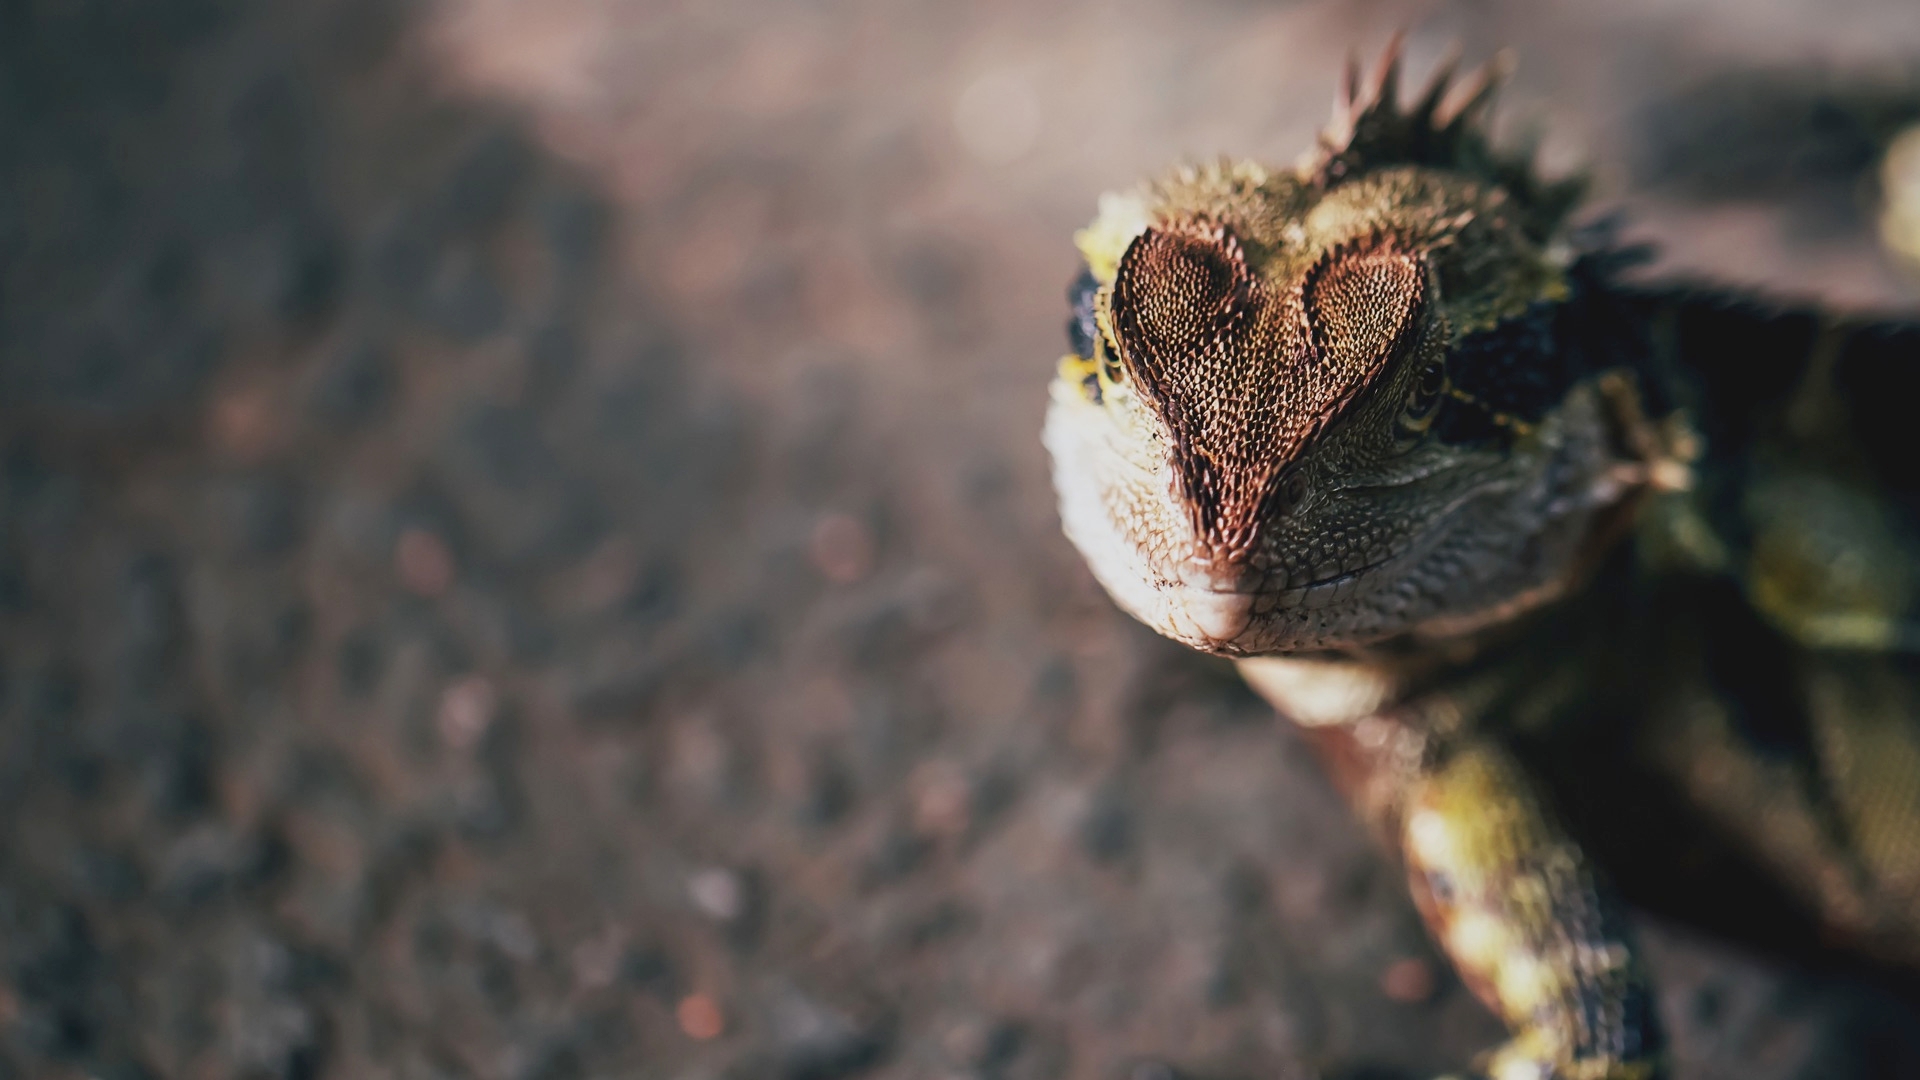 Are You Considering A Reptile Or An Amphibian?